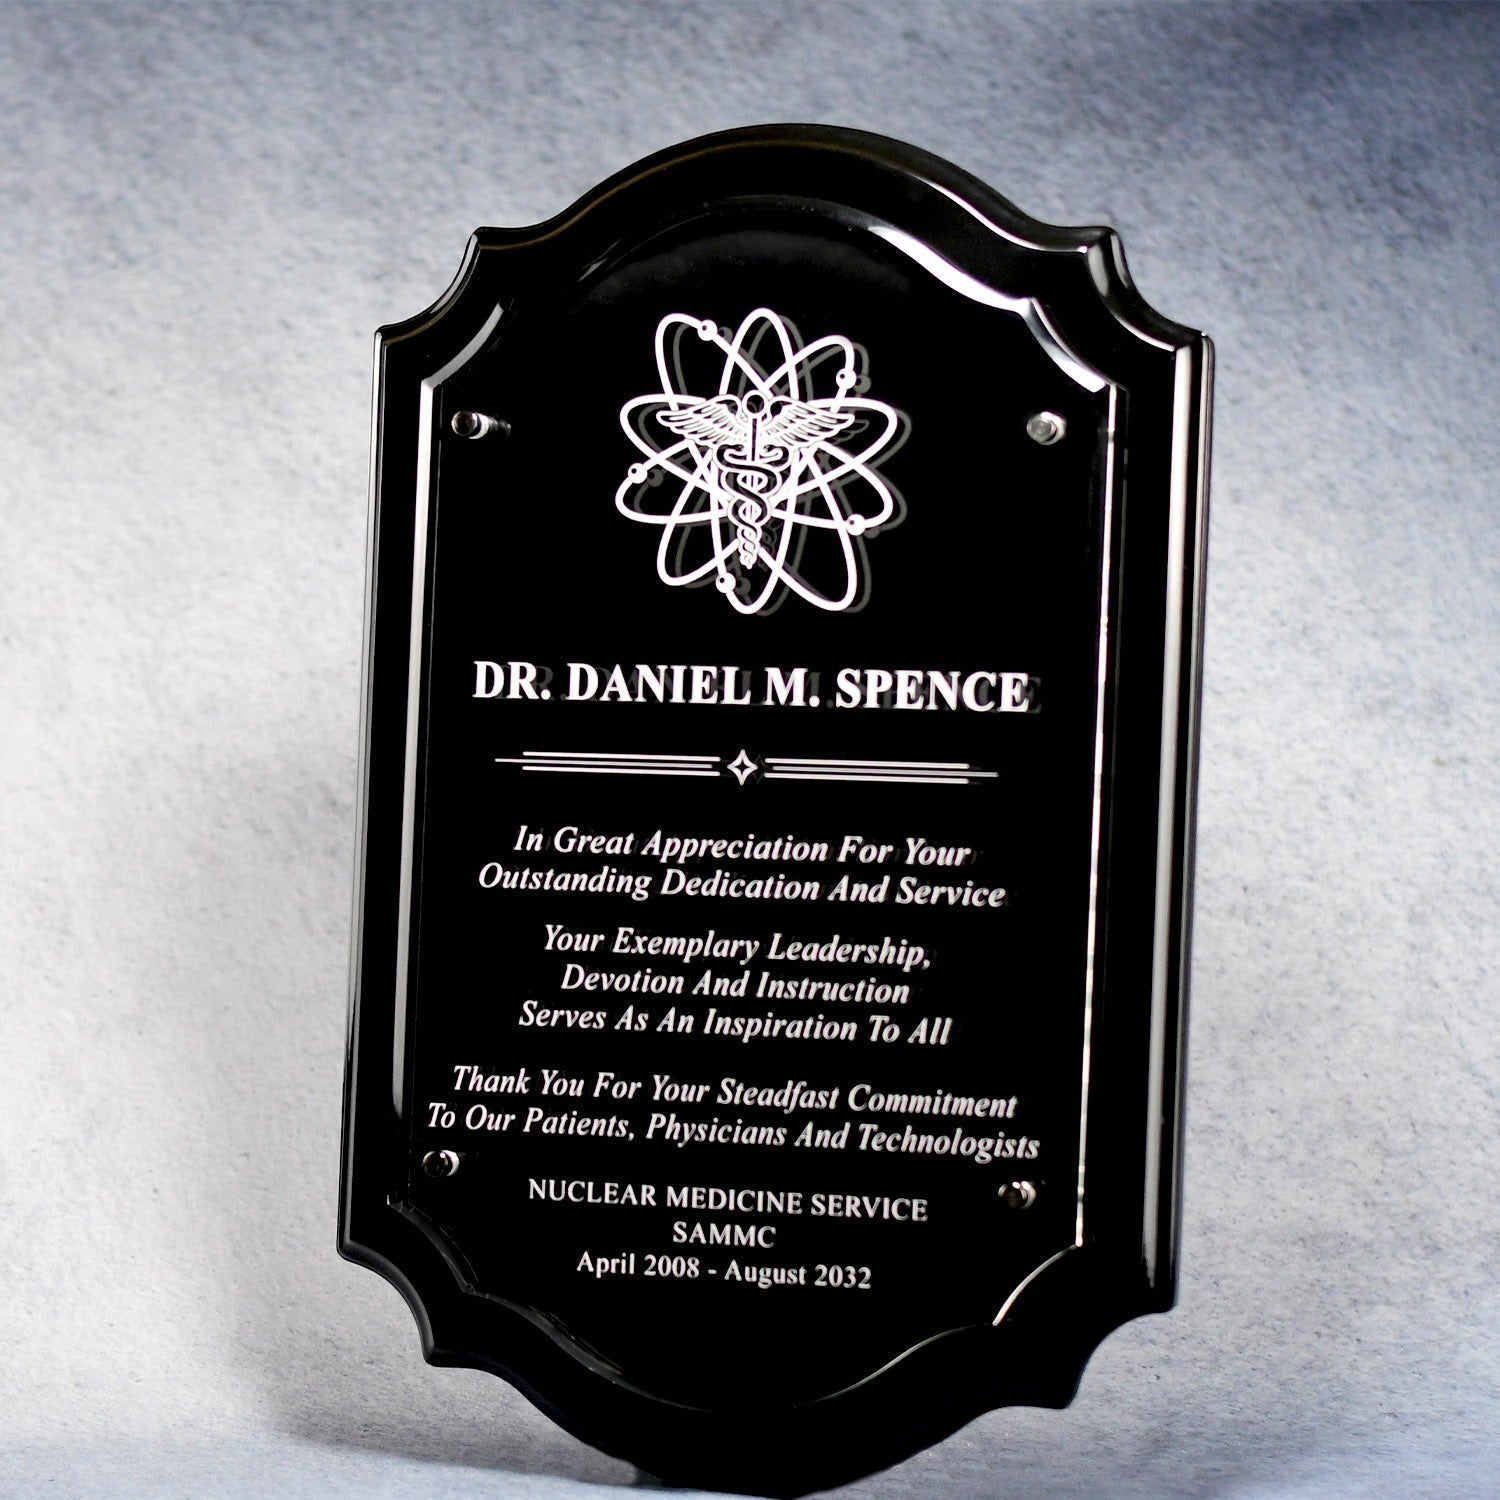 Scalloped Edge Plaque With Floating Acrylic Plate | Alliance Awards LLC.